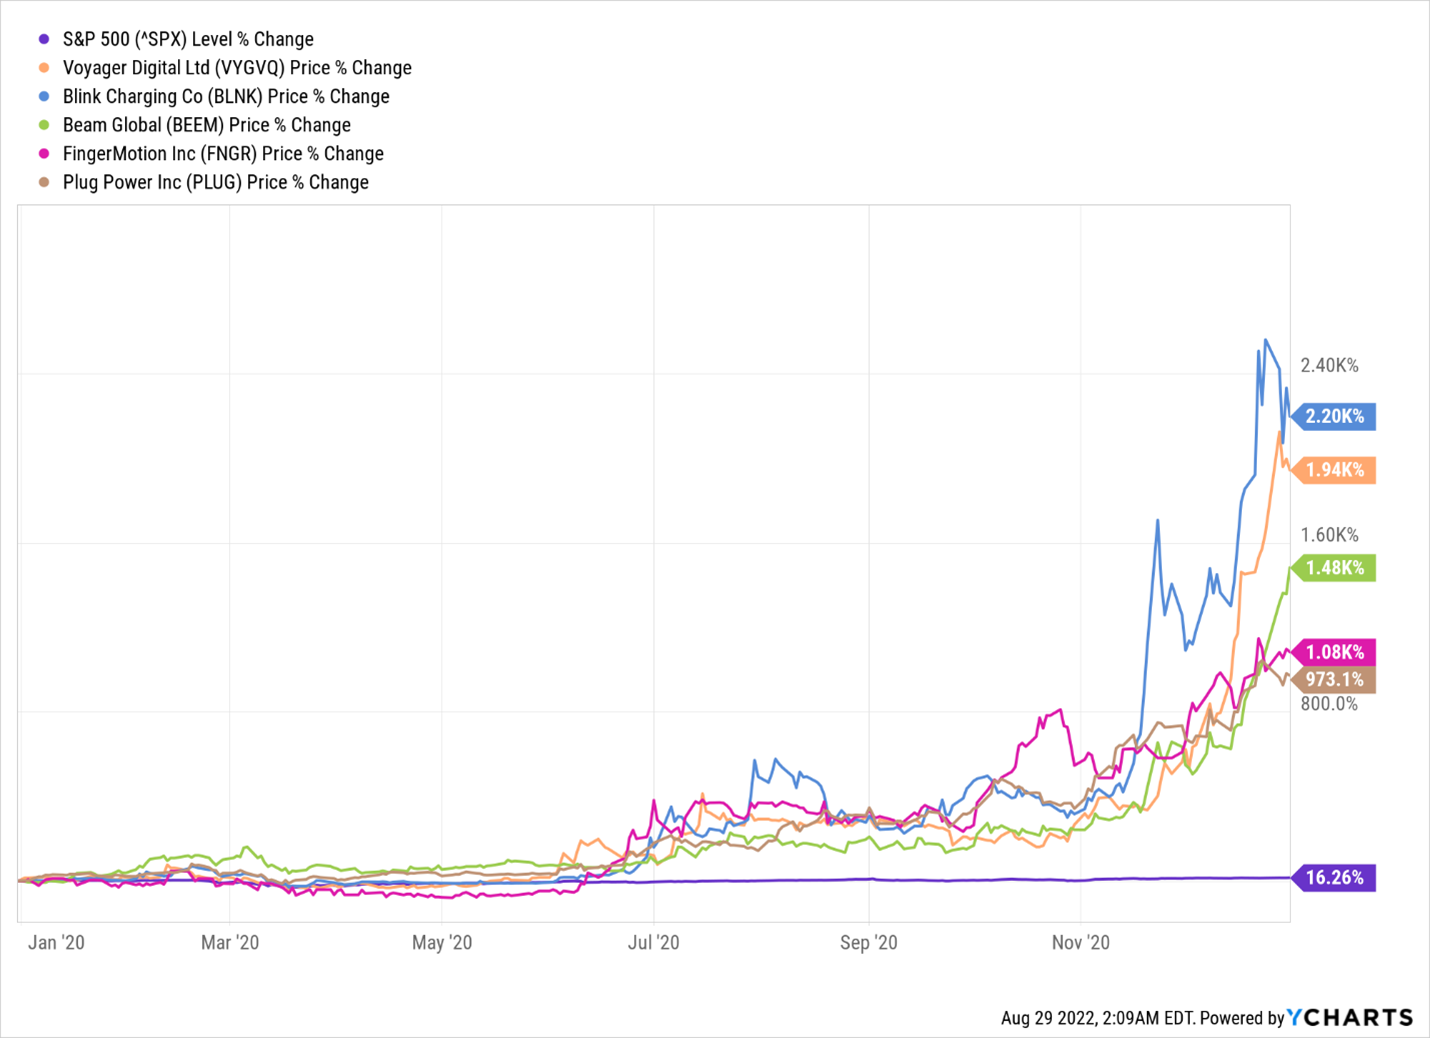 a chart that tracks the S&P 500's level % change against Voyage Digital' price % change, Blink Charging's price % change, Beam Global's price % change, FingerMotion's price % change, and Plug Power's price % change from January 2020 to December 2020